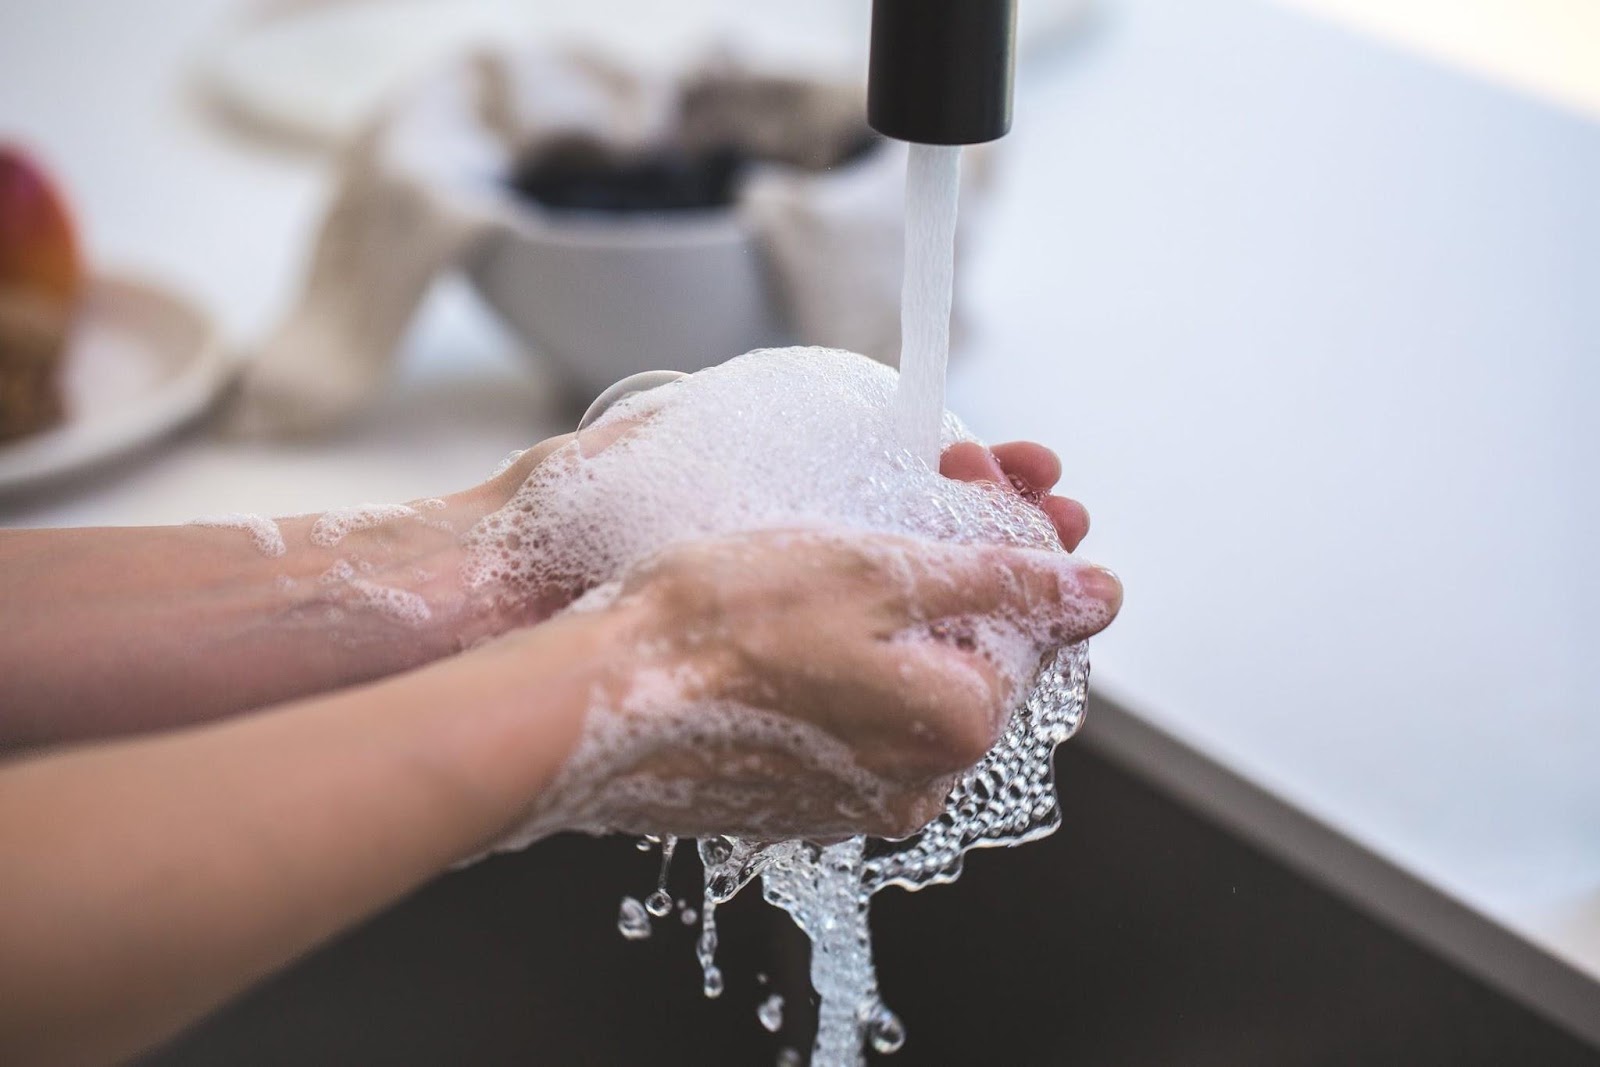 Making Sure Your Home Has Everything You Need - Running water washing hands